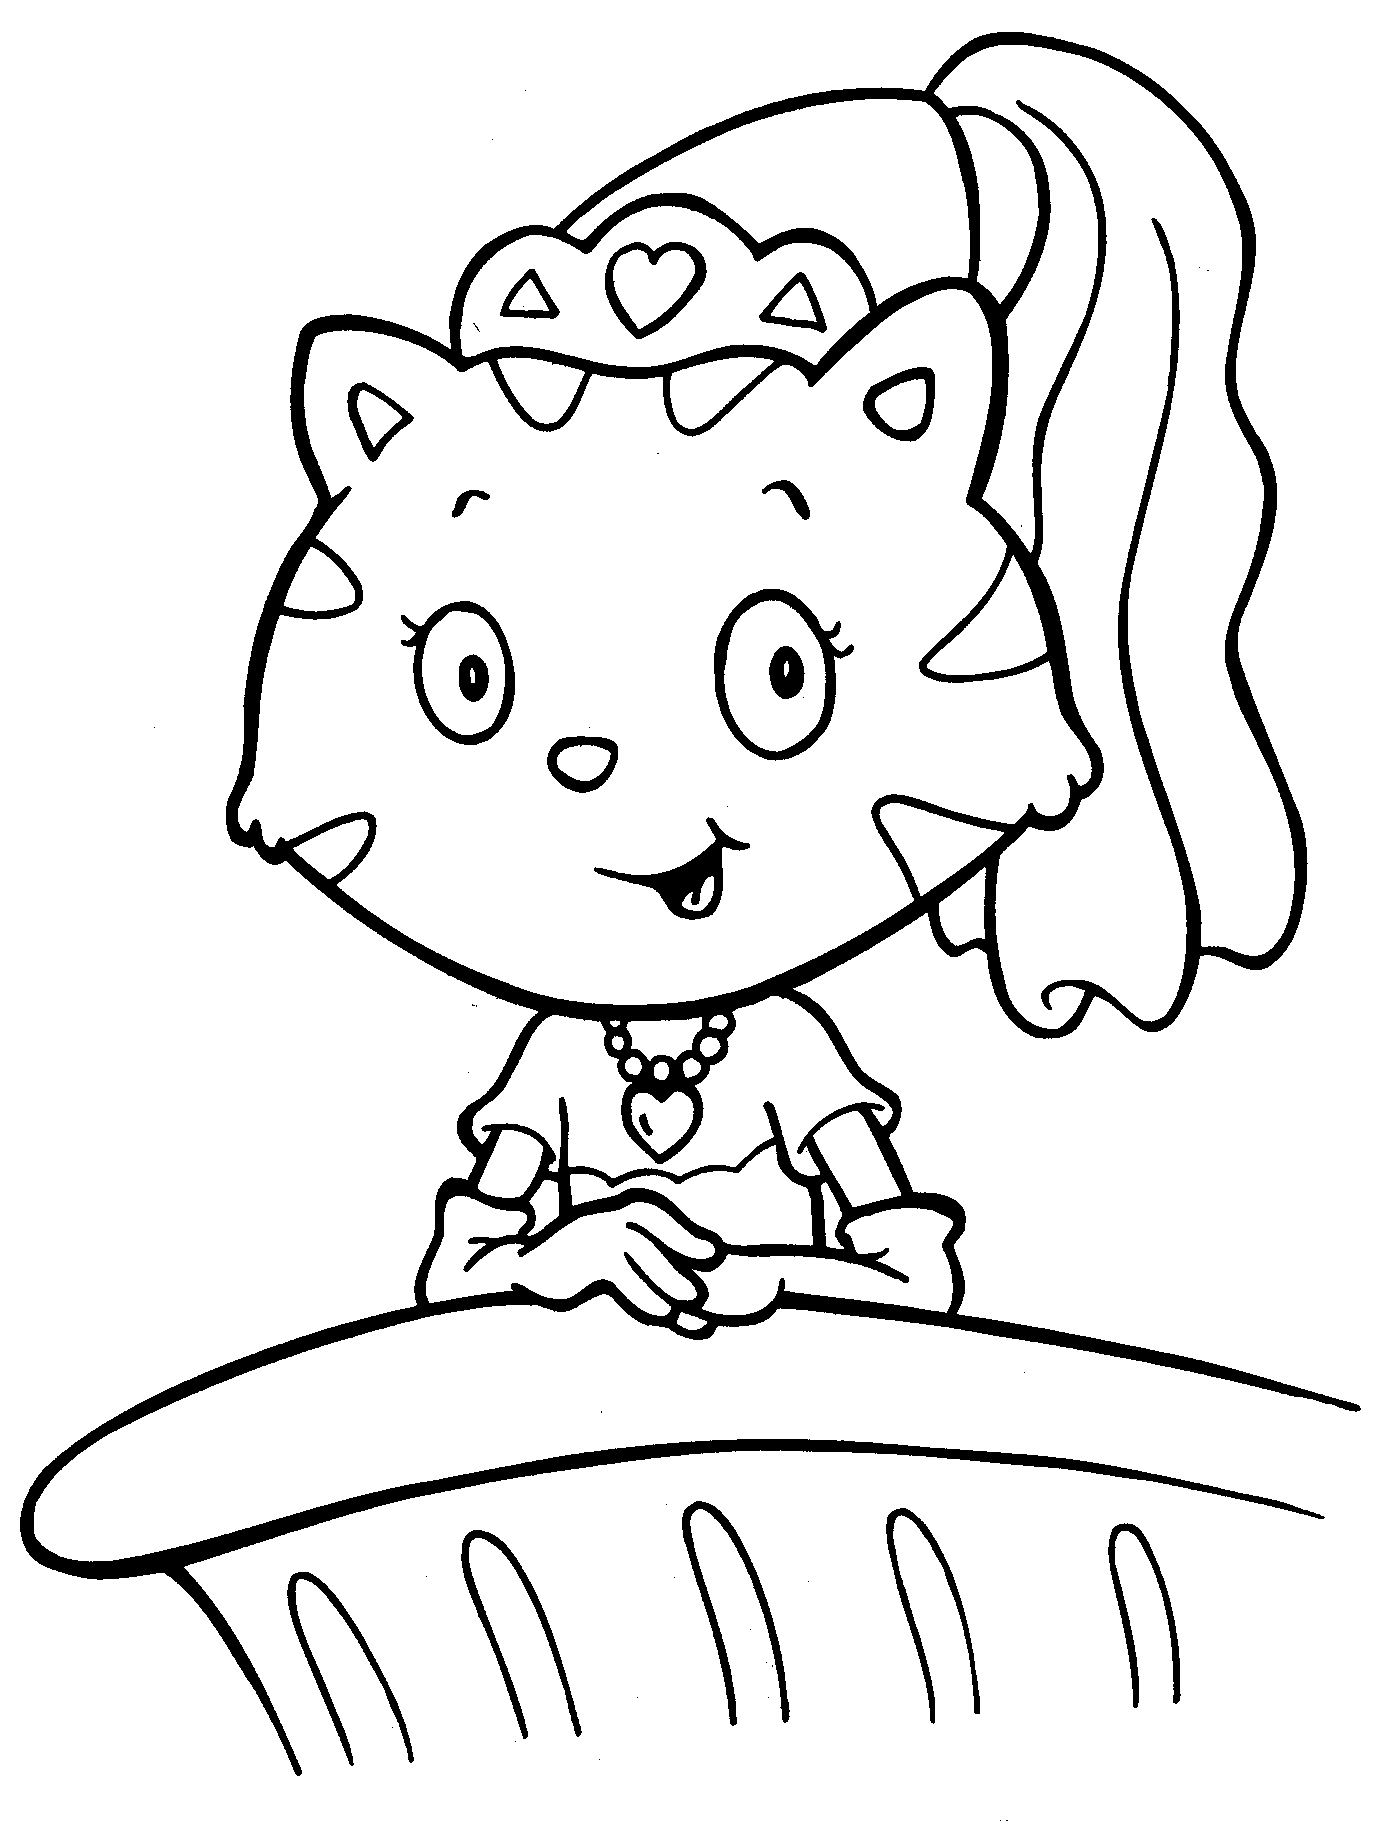 coloring cat pages free printable cat coloring pages for kids cat coloring pages 